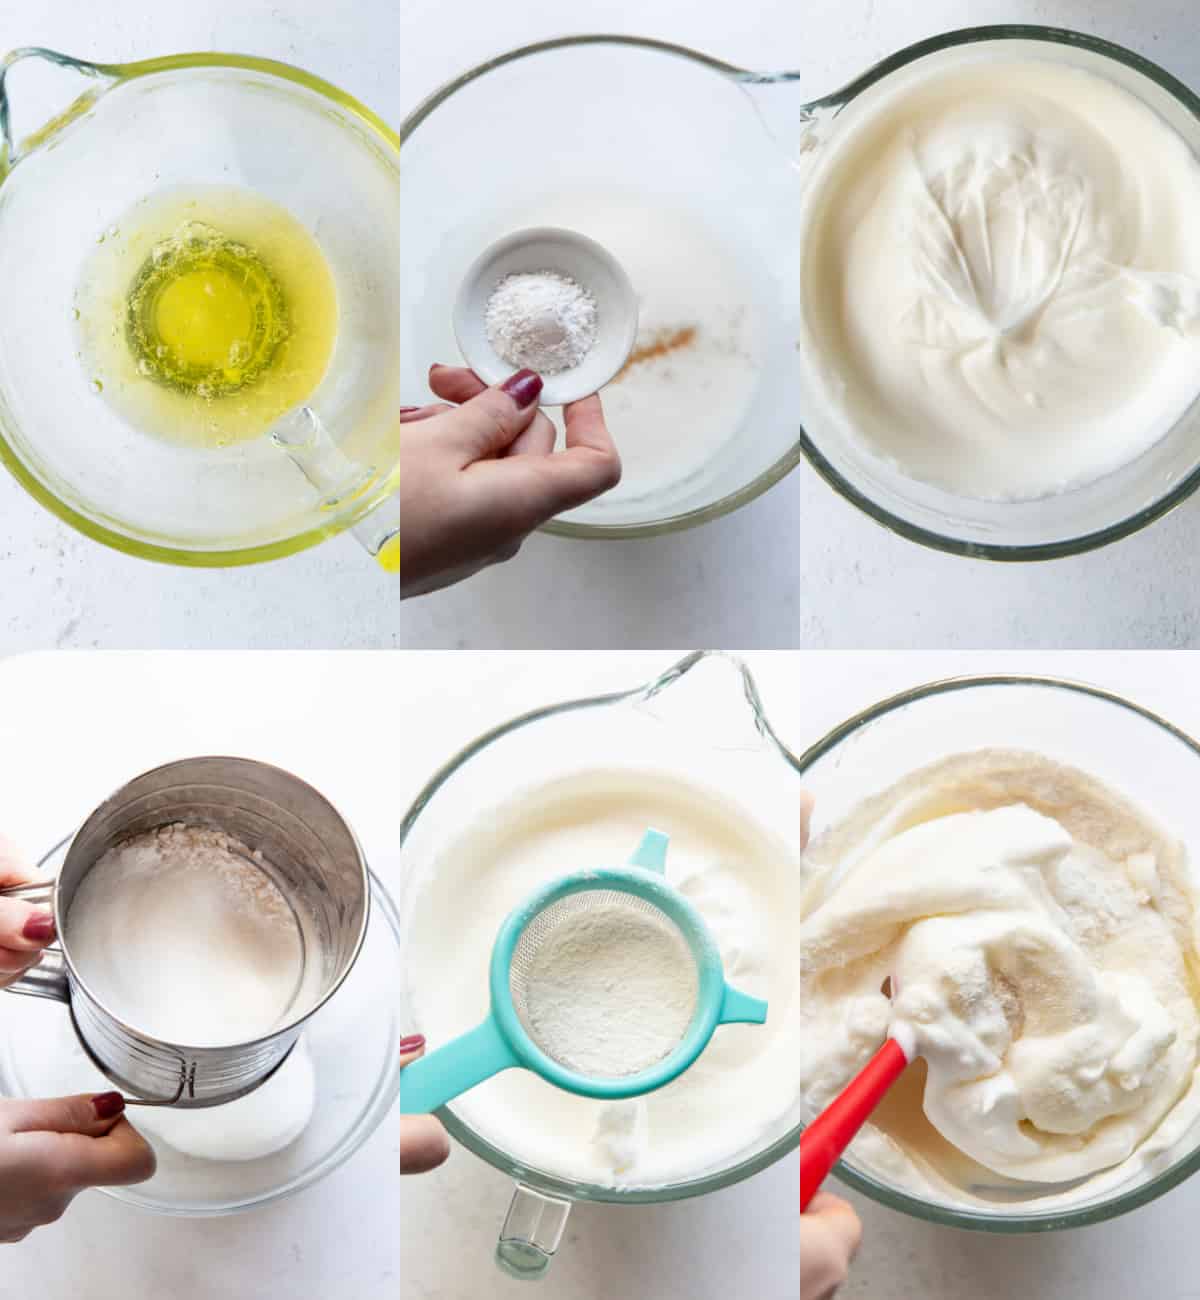 Process shots of separating egg whites and yolks, sifting flour, and beat egg whites into soft peaks.